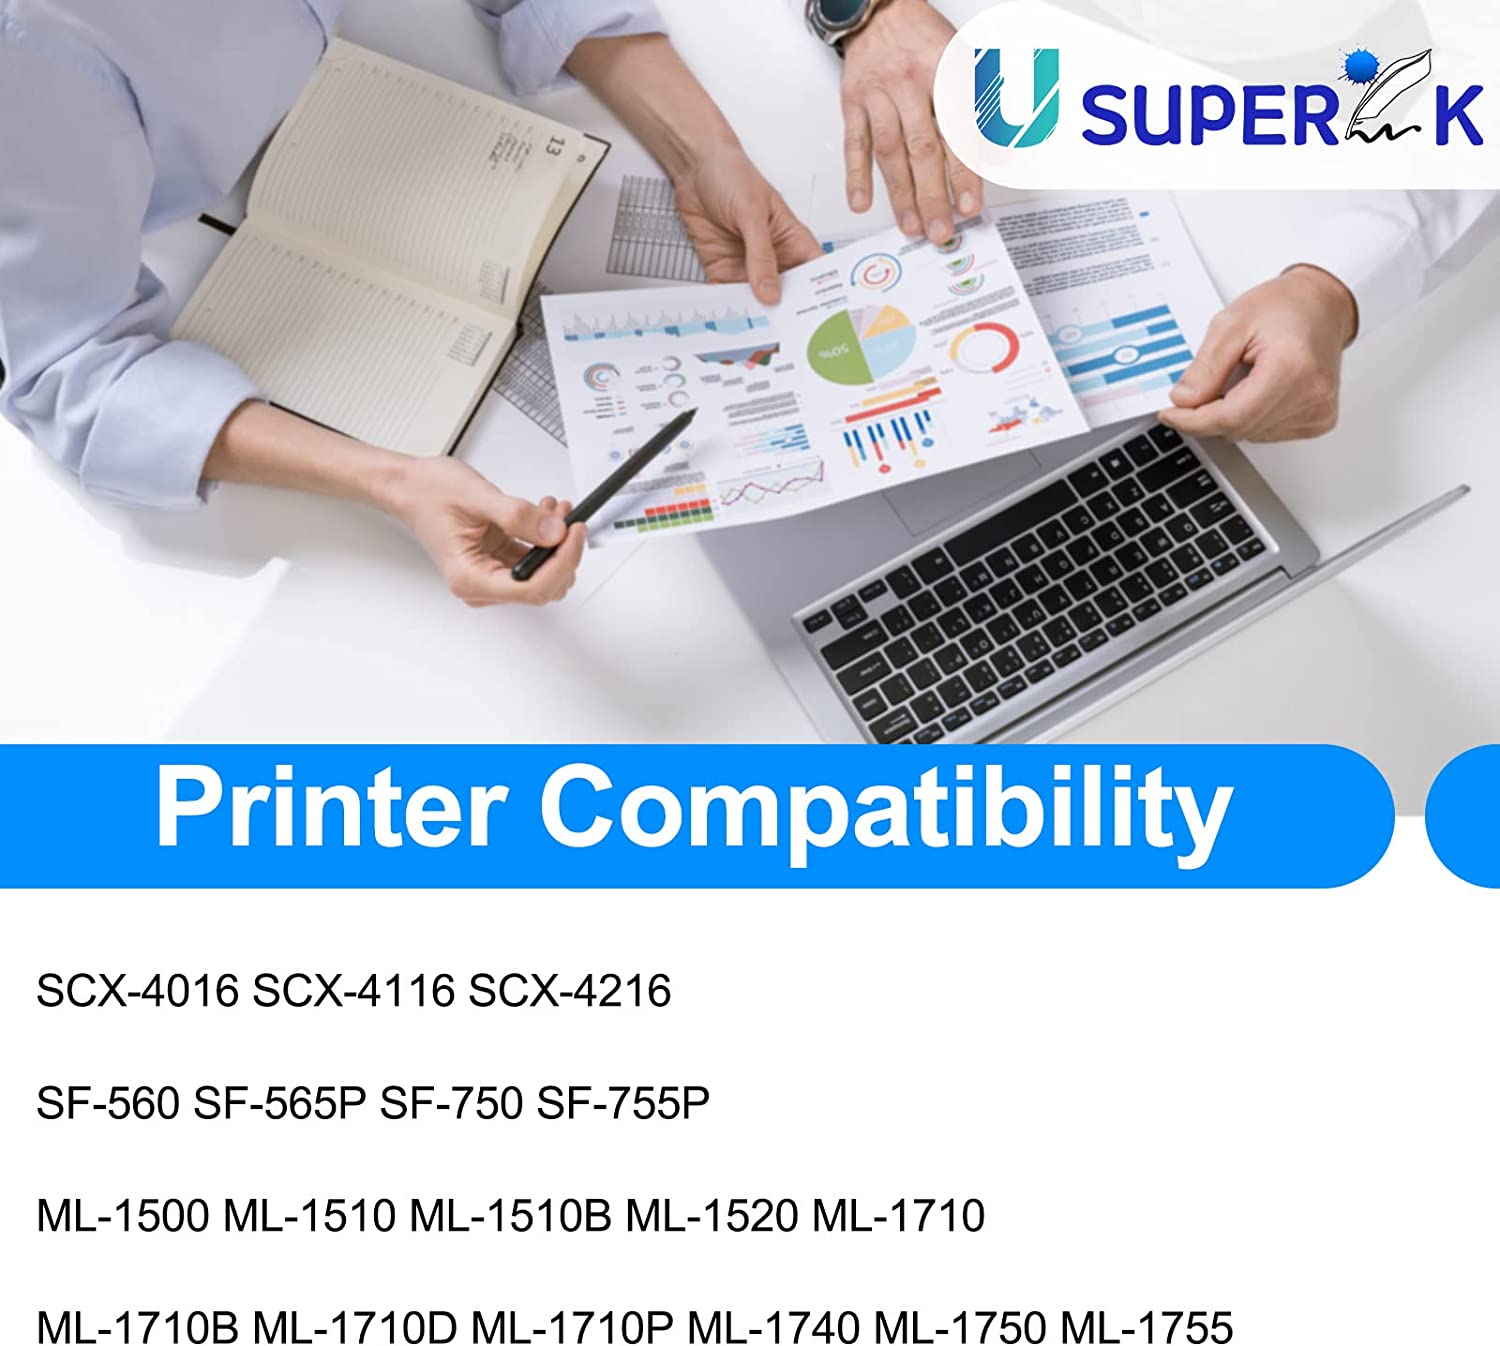 Compatible Laser Toner Cartridge for Samsung ML-1710D3 Black Laser Toner for ML-1500, ML-1510, ML-1510B, ML-1520, ML-1710, ML-1710B, ML-1710D, ML-1710P, ML-1740, ML-1750 & ML-1755 s - image 3 of 7